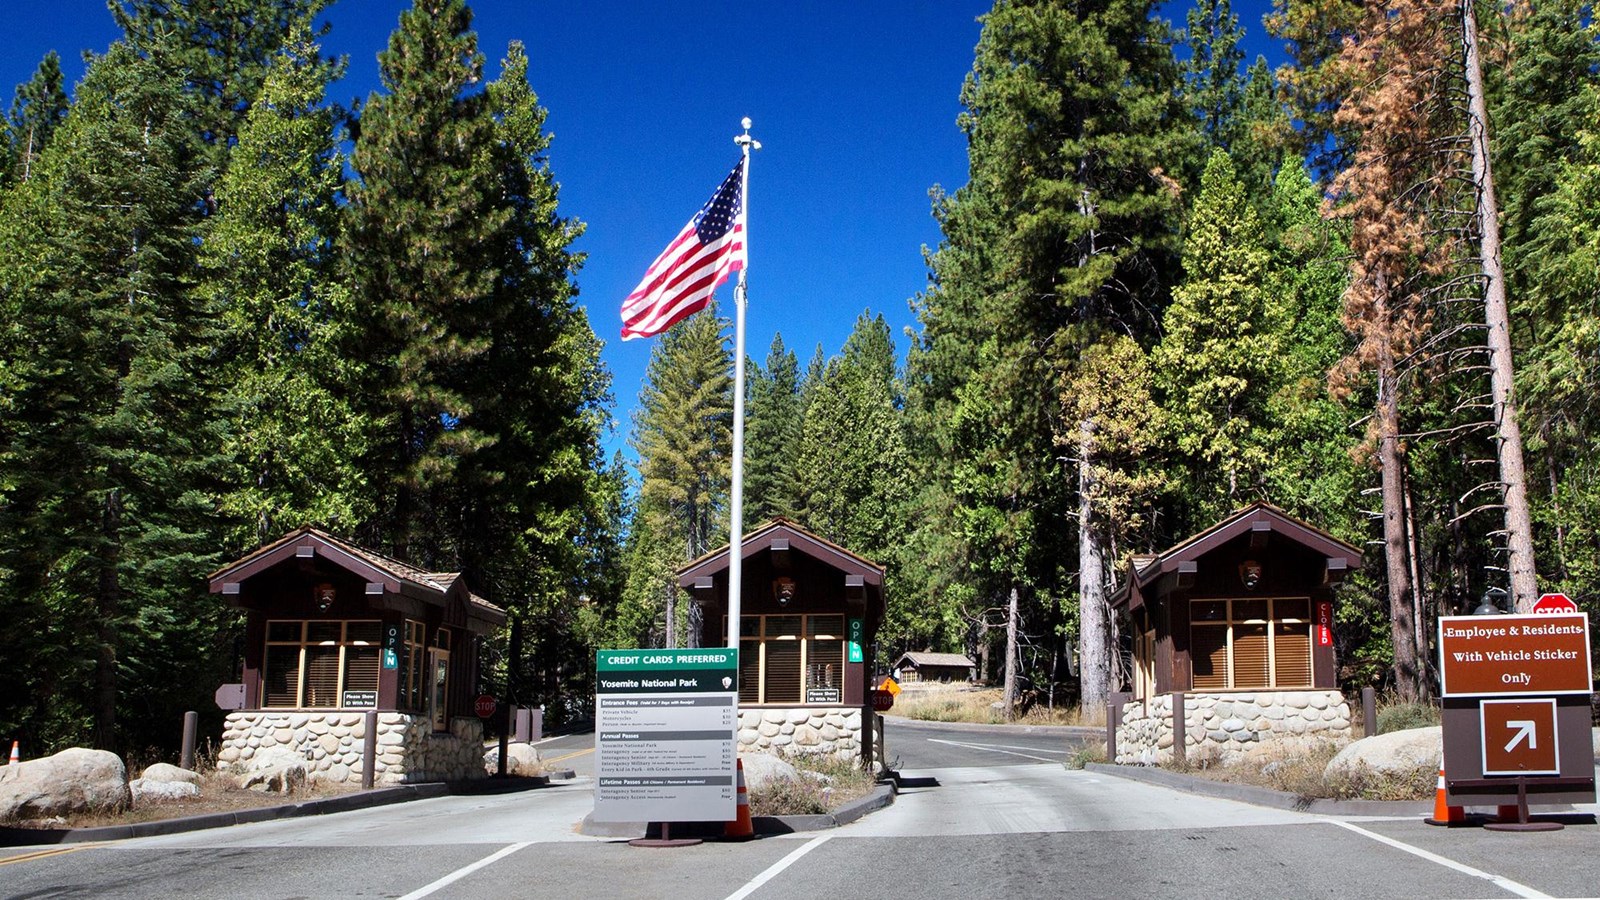 Three small wooden buildings at the entrance with the American flag on a pole